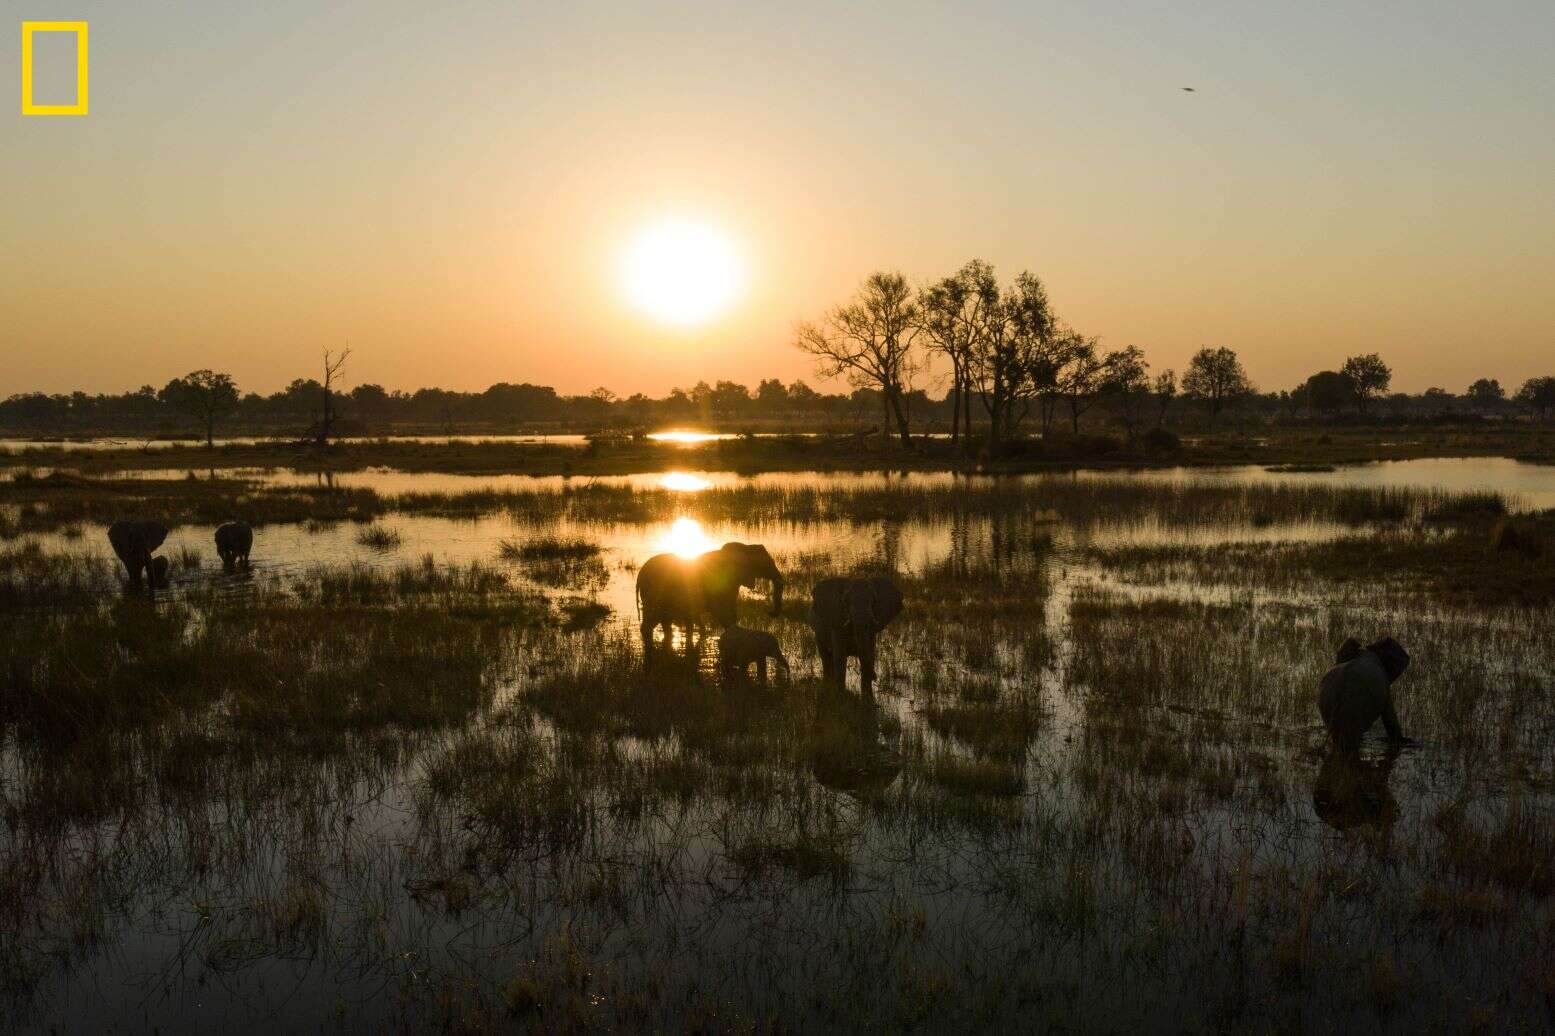 Nationation Geographic and De Beers team up to protect Delta- Picture shows elephants in the delta at sun rise